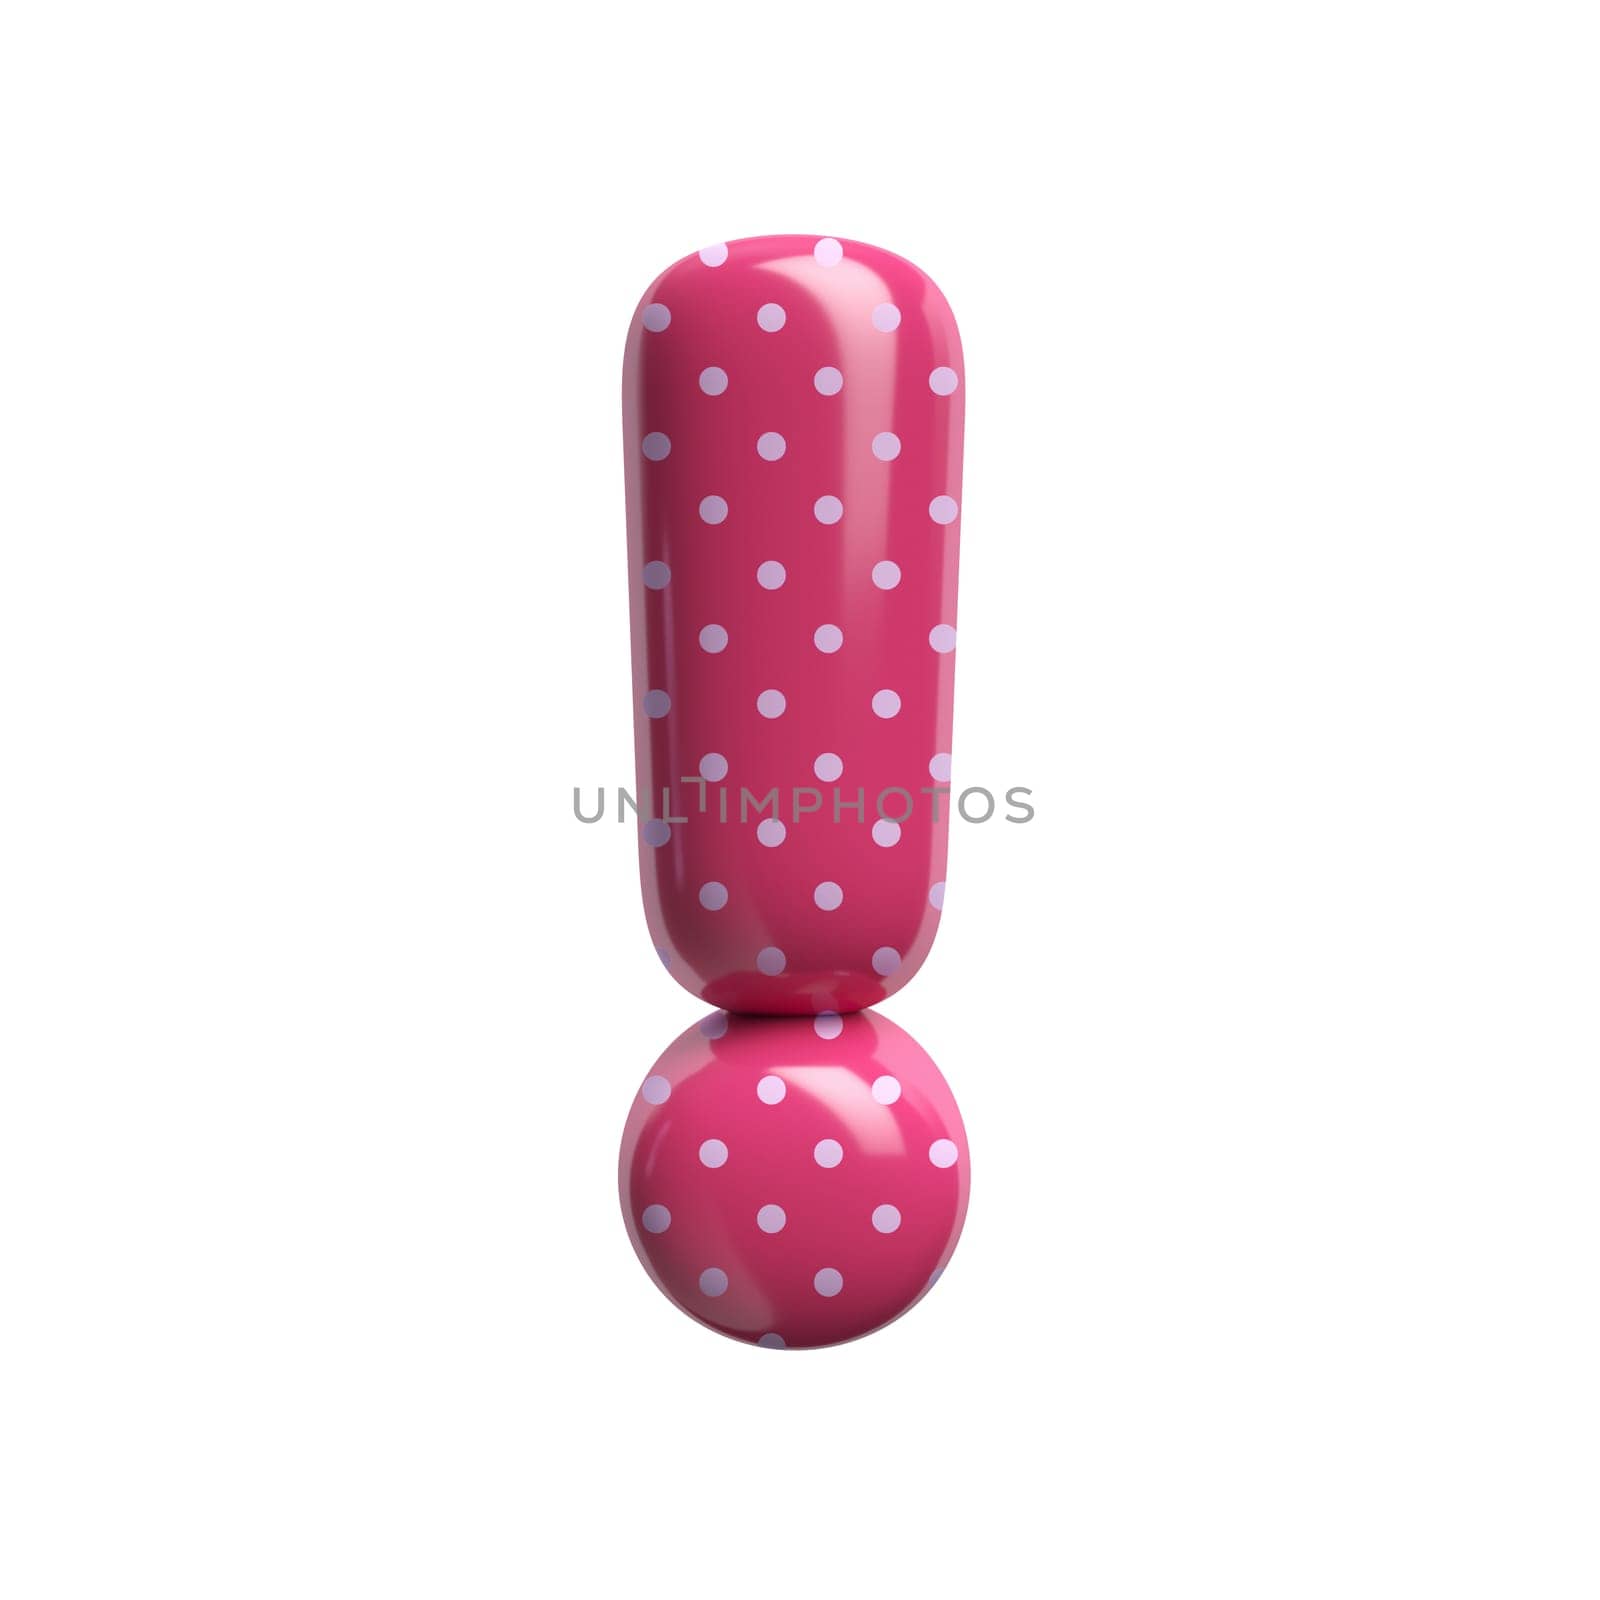 Polka dot exclamation point - 3d pink retro symbol isolated on white background. This alphabet is perfect for creative illustrations related but not limited to Fashion, retro design, decoration...